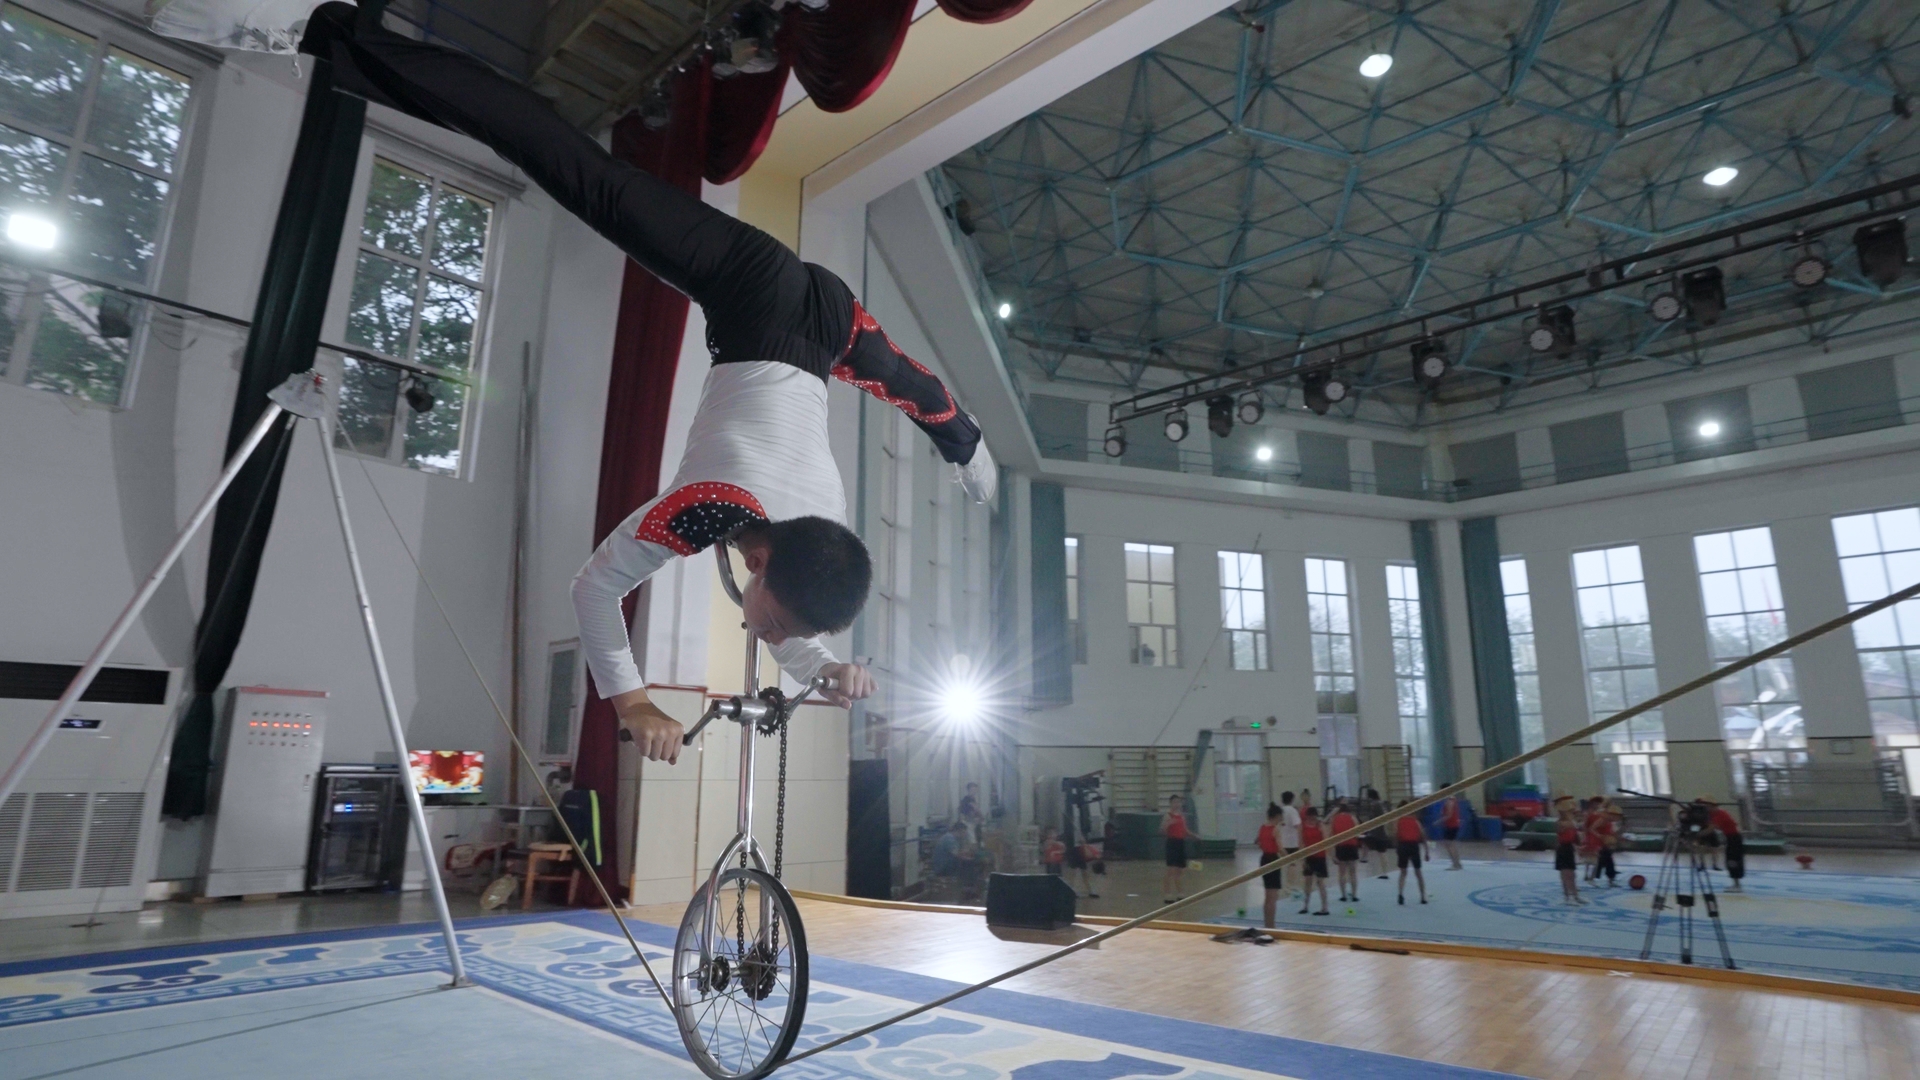 Zhang Hao can do various stunts on the slack wire, including balancing on a monocycle with only his upper body. /CGTN